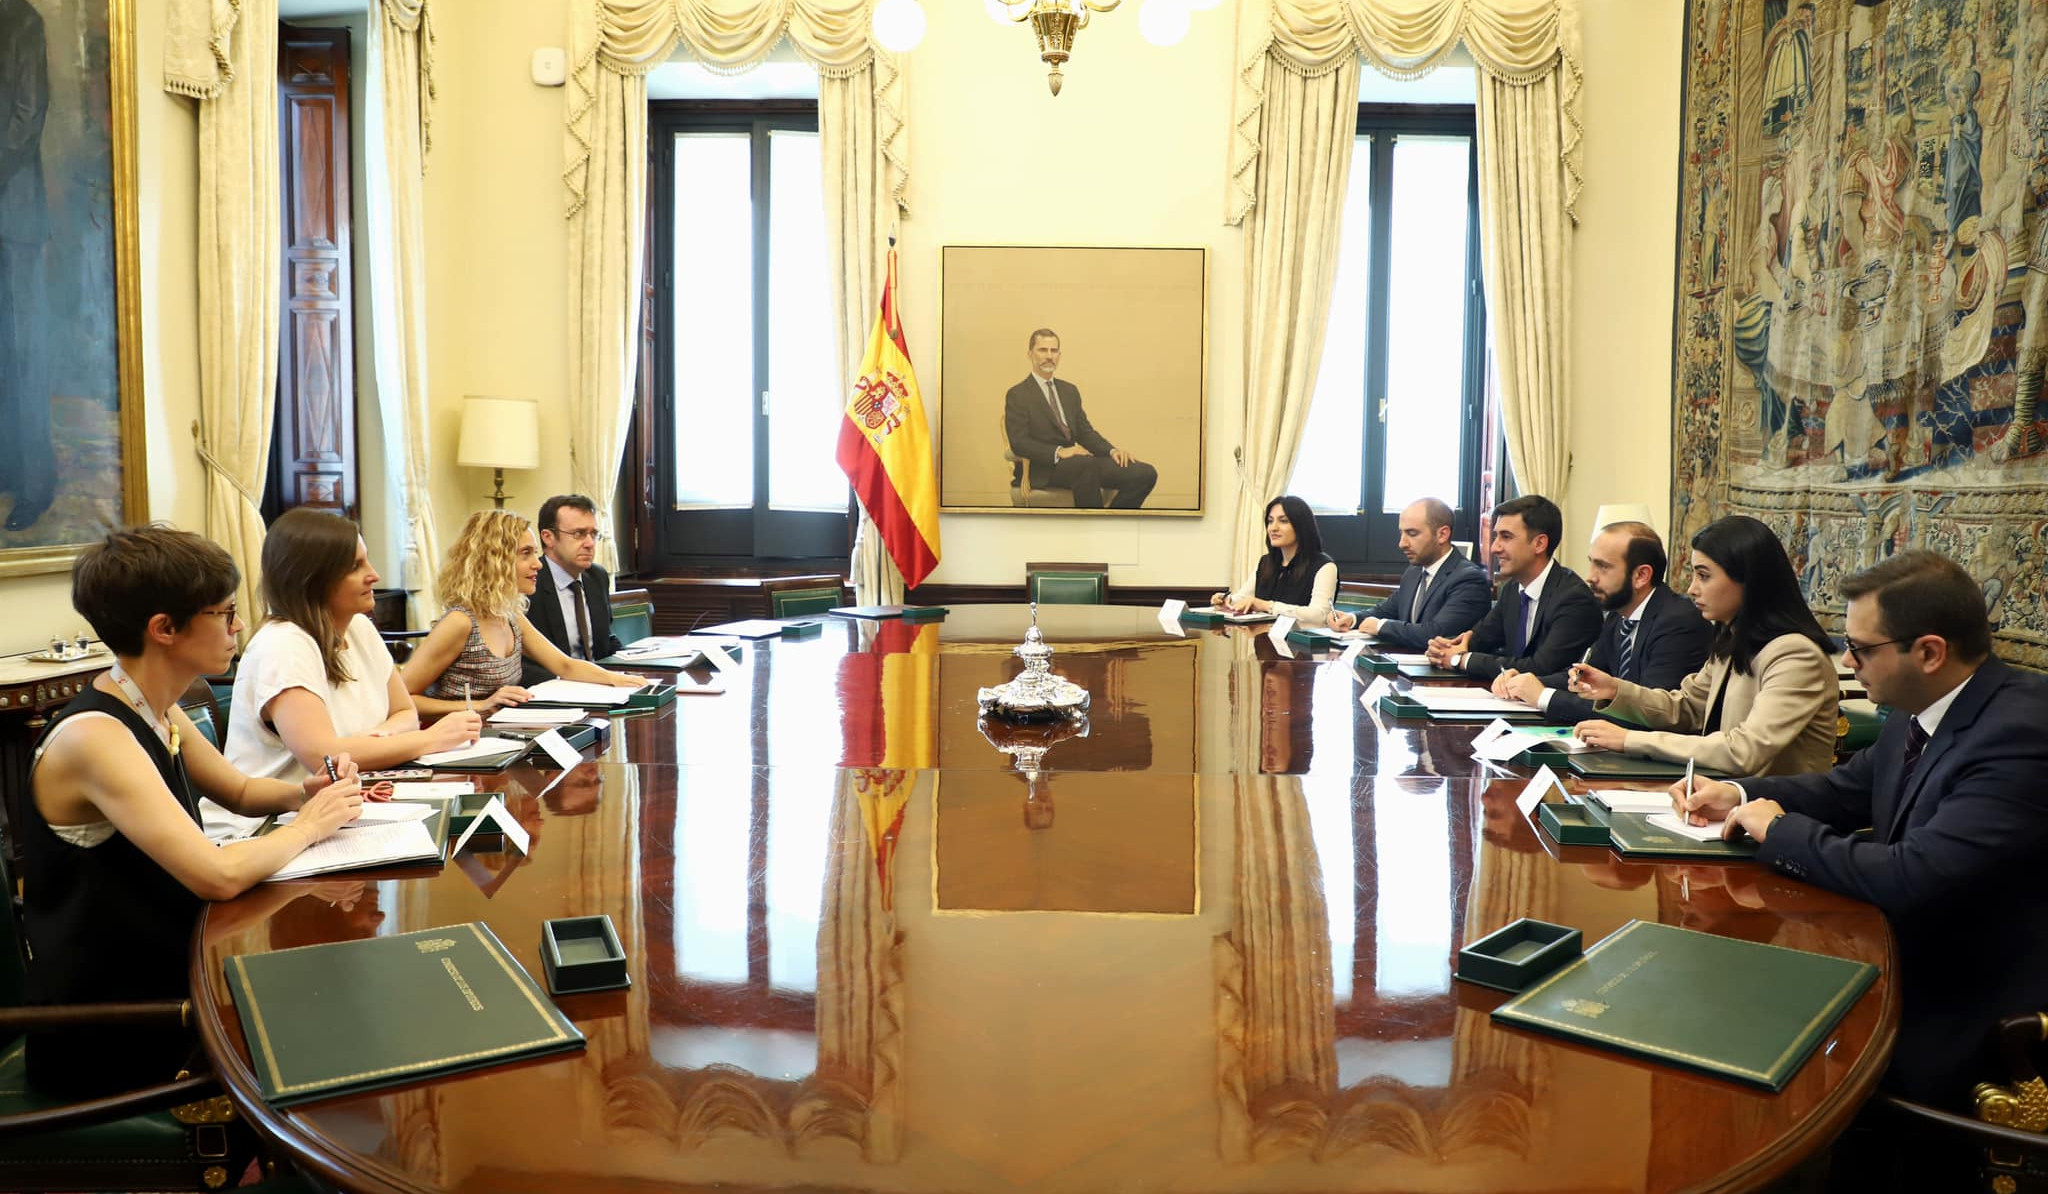 Meeting of Minister of Foreign Affairs of Armenia with President of Congress of Deputies of Kingdom of Spain